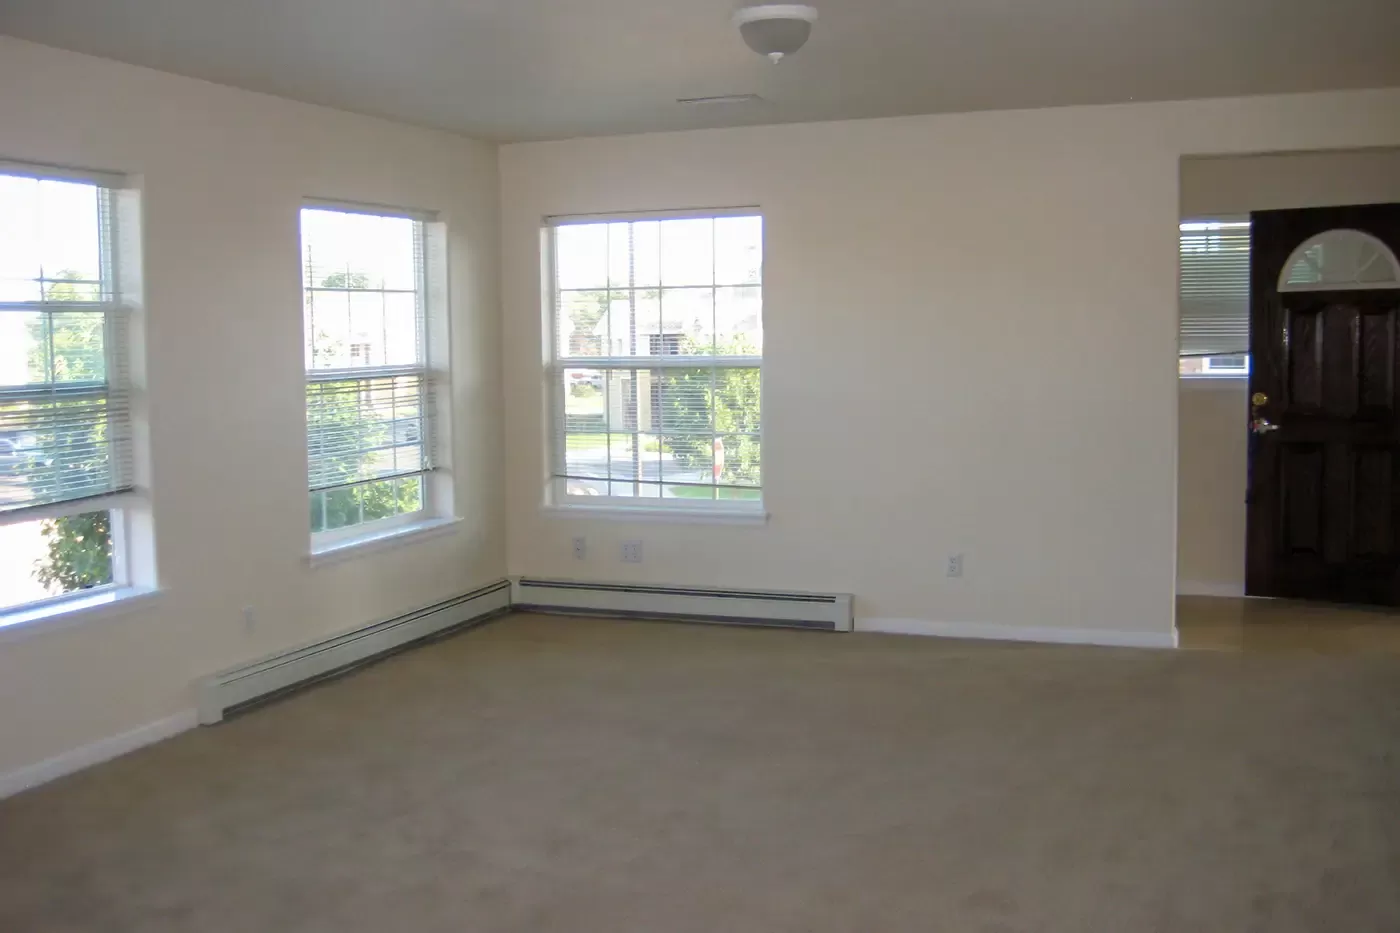 Photo of the interior at Linden Pointe apartments in Orchard Mesa